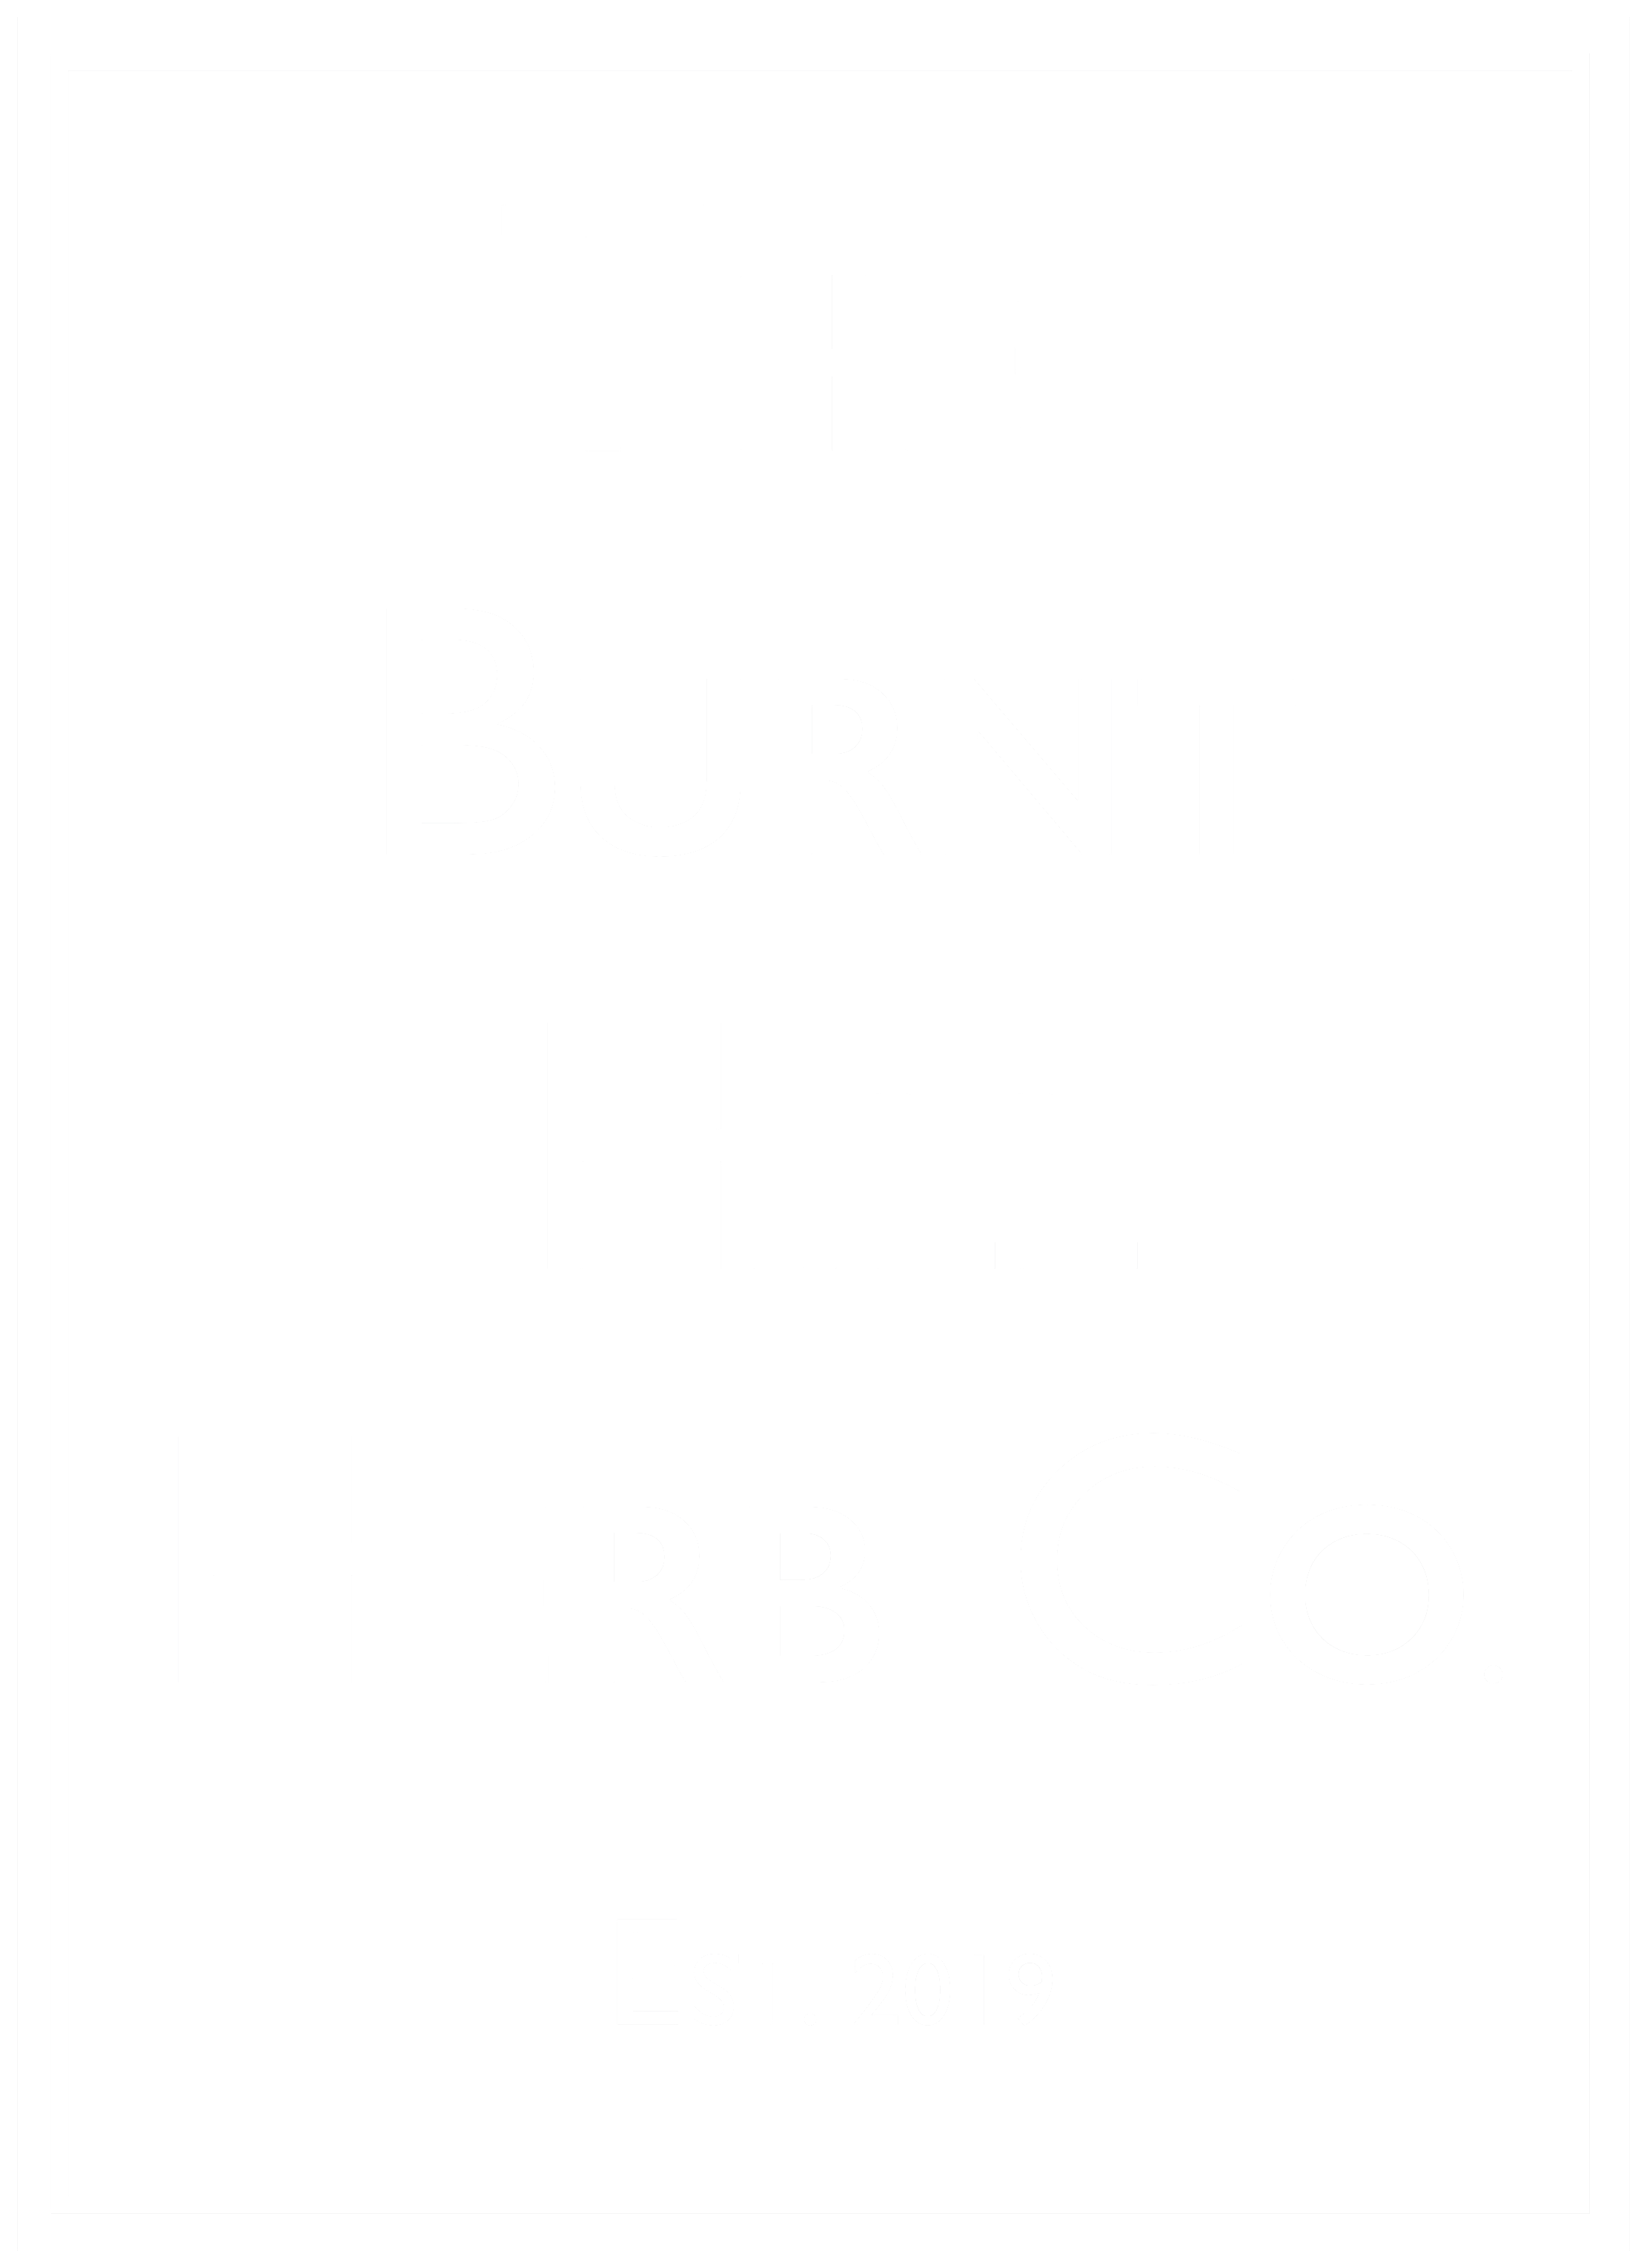 The Burnt Hill Herb Co.